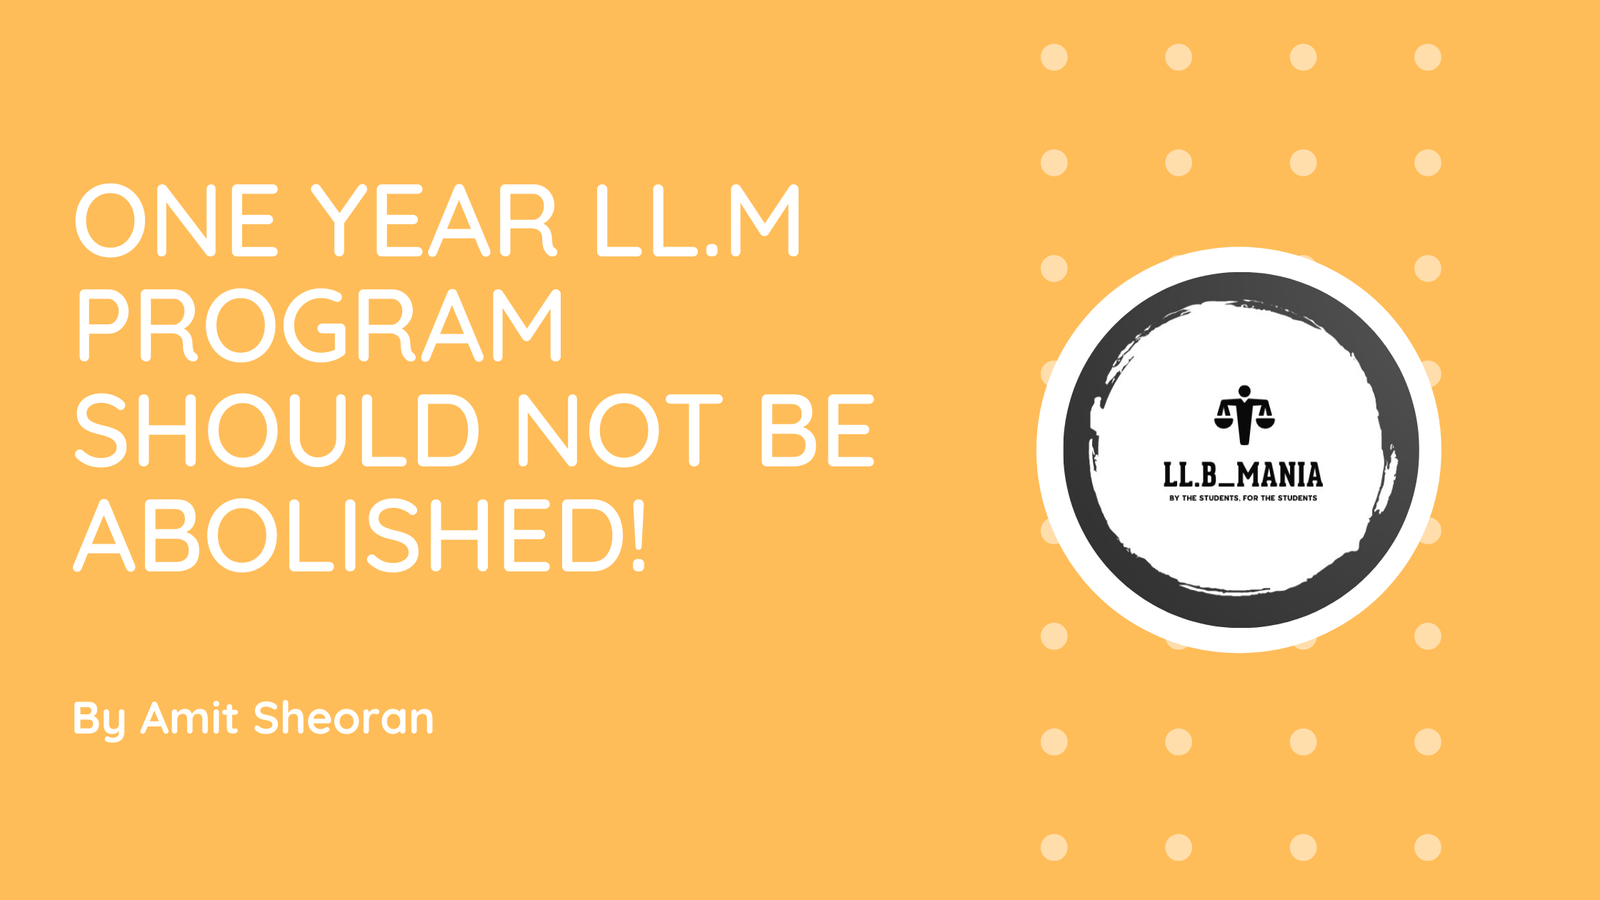 One Year LL.M Program Shouldn’t be Abolished!